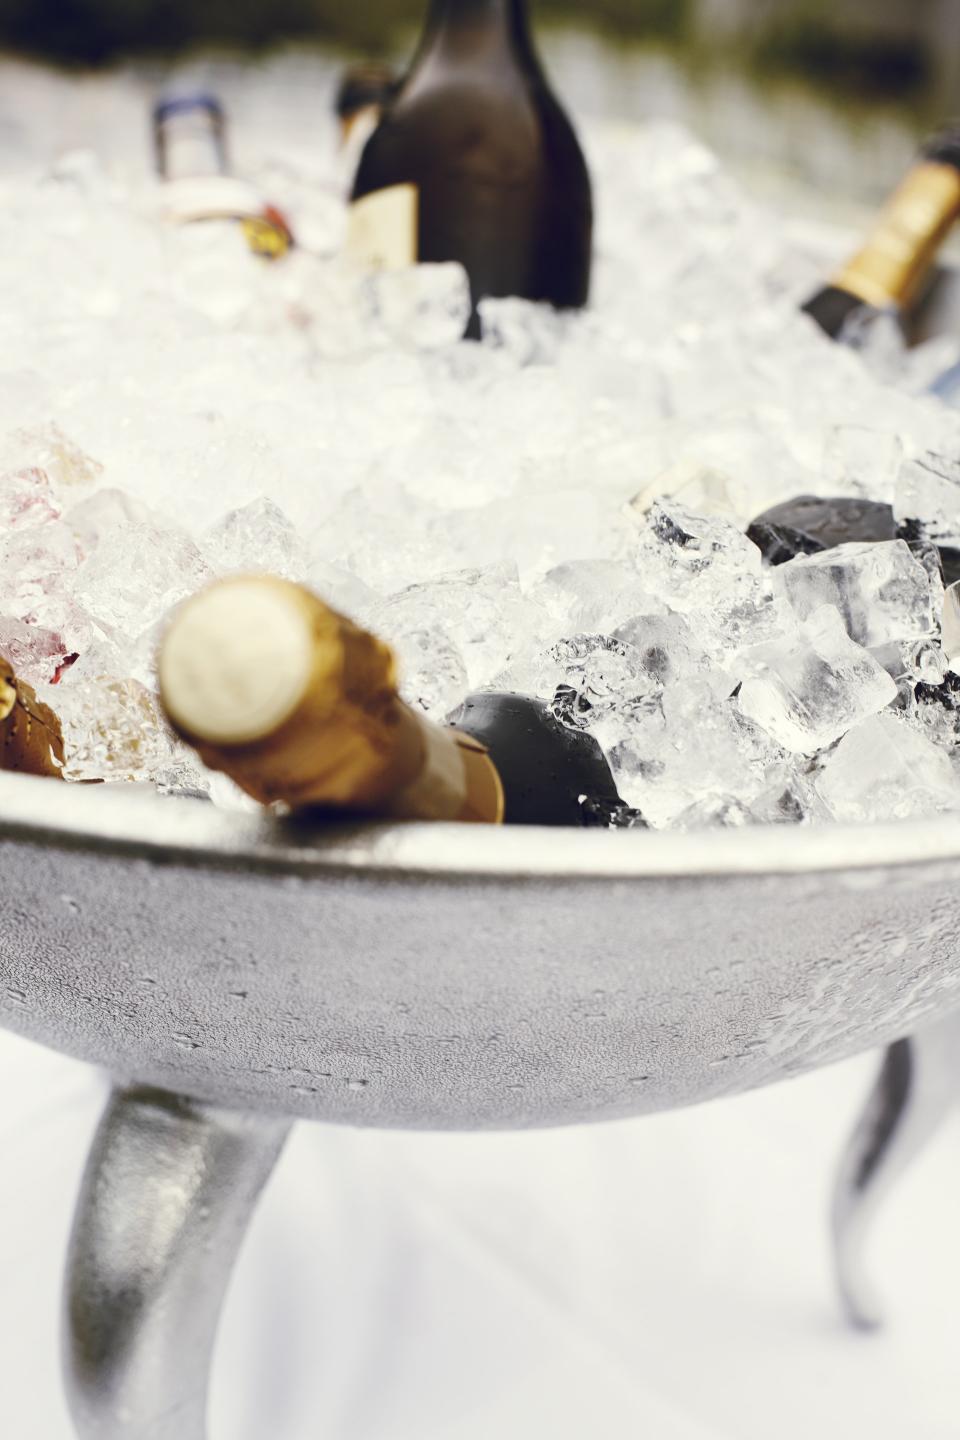 Watch out for ice buckets too [Photo: Pexels]